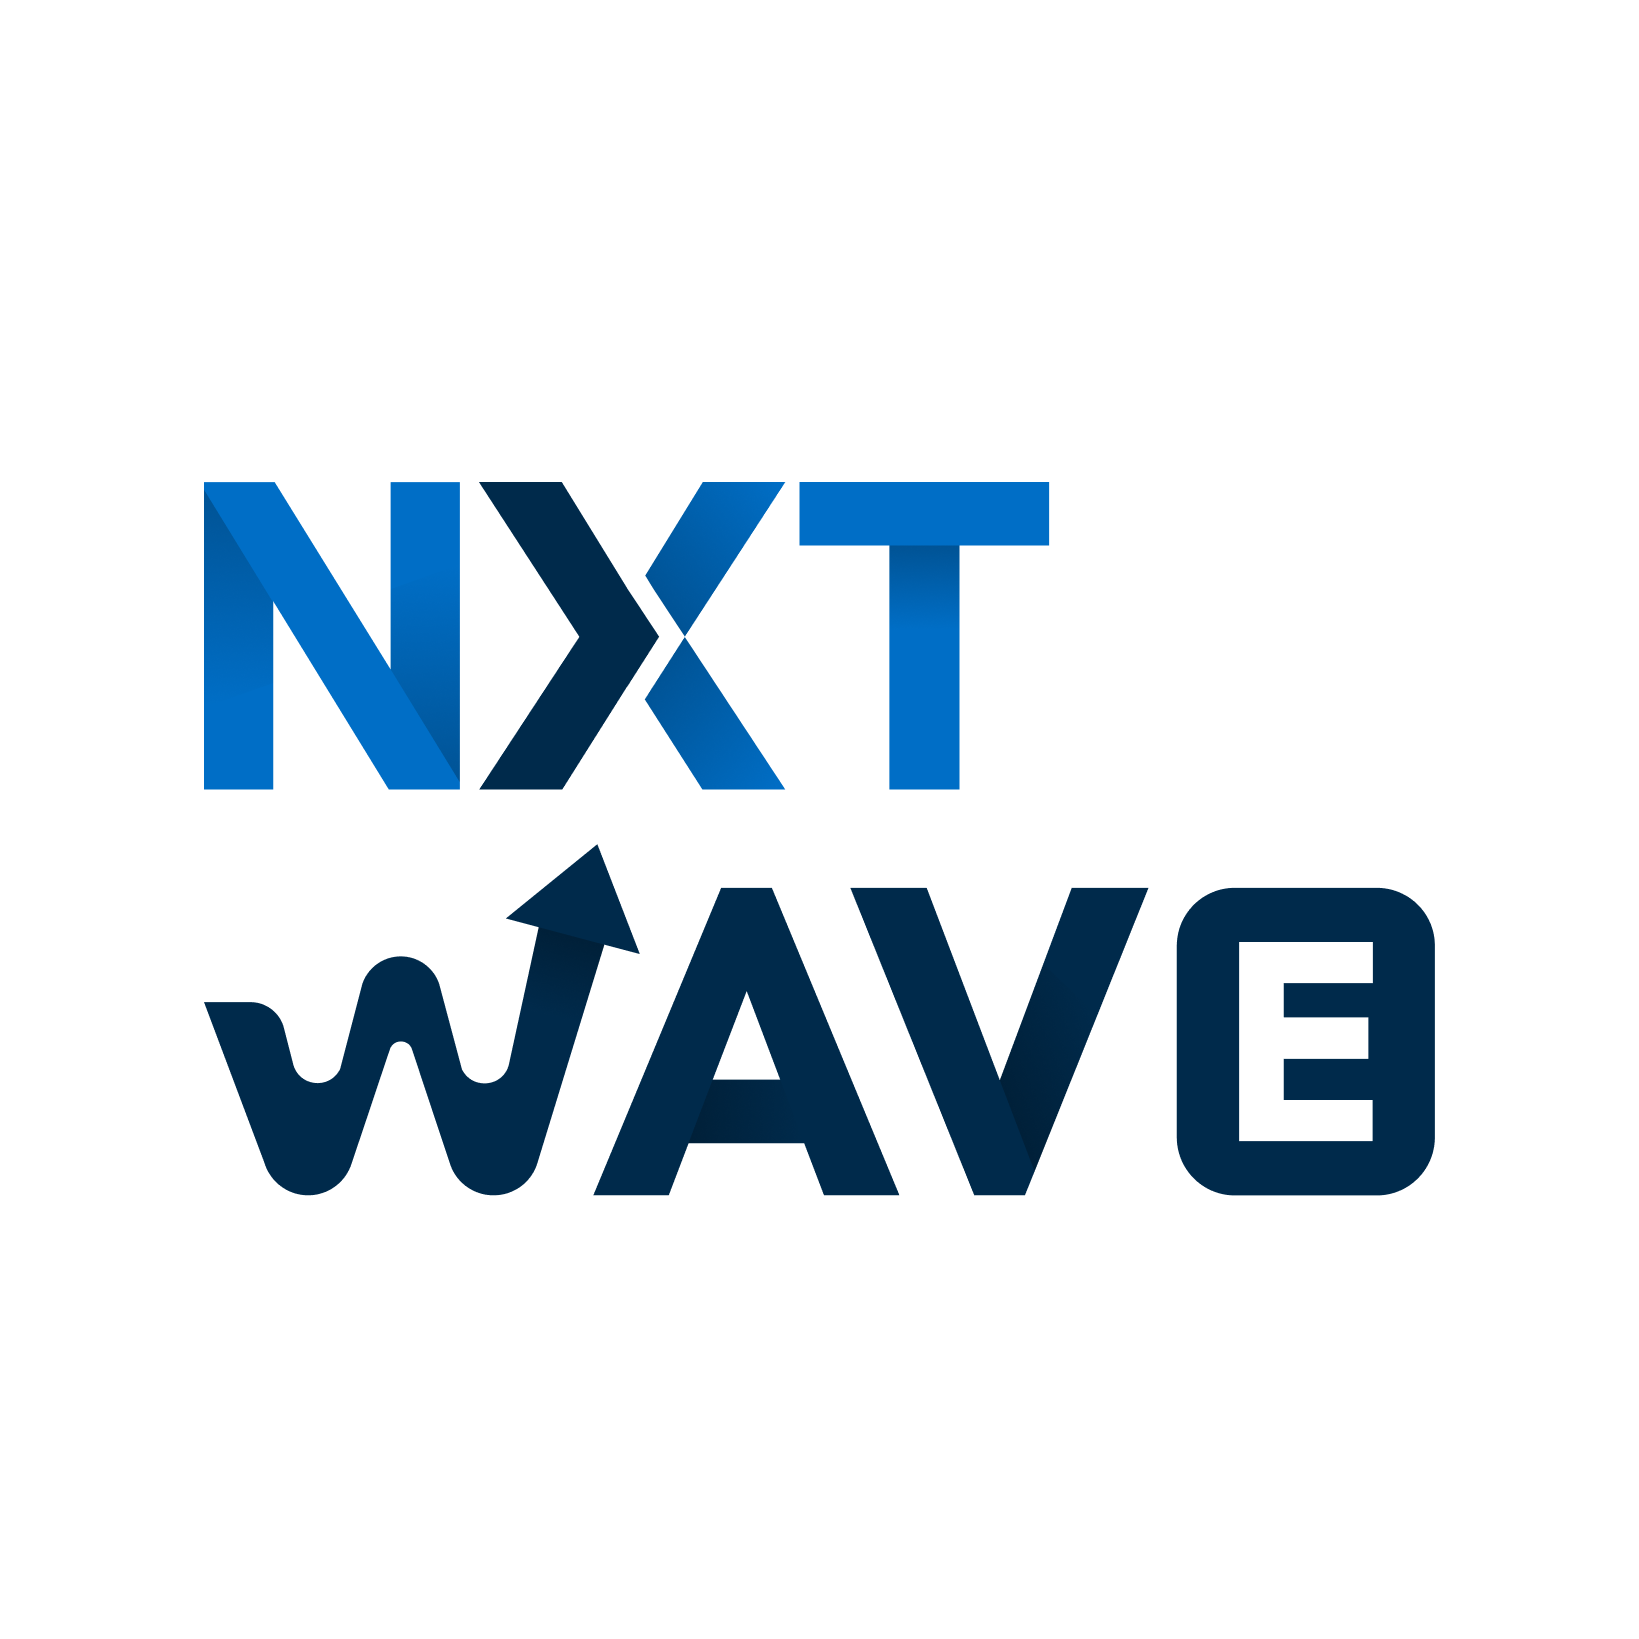 NxtWave: In just a year of its launch, this vernacular Ed-Tech startup acquired paid subscribers from 250+ districts